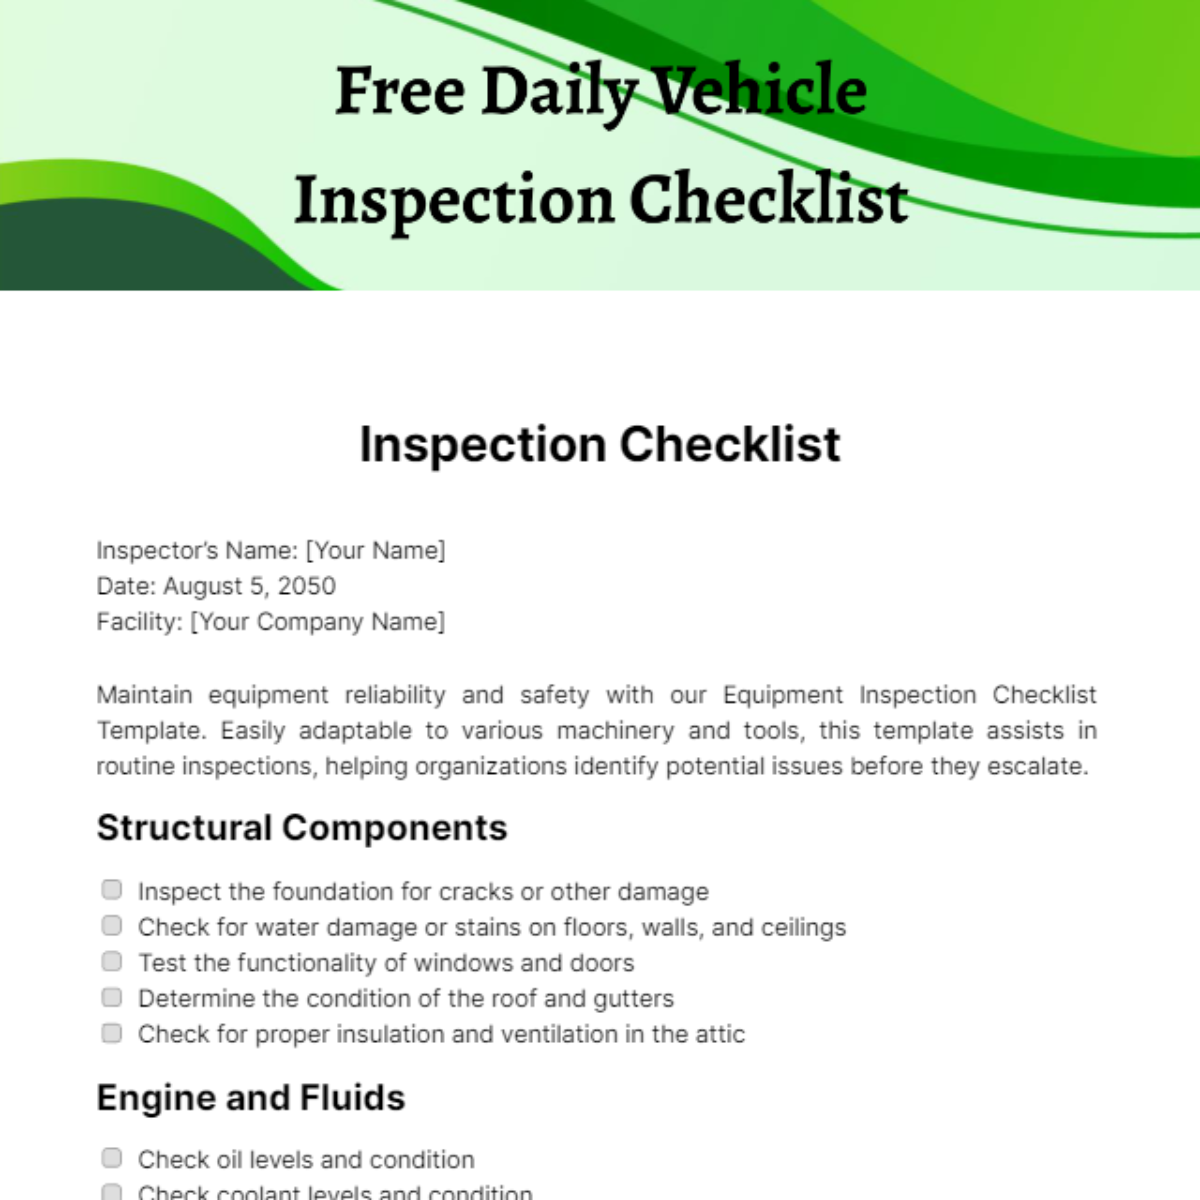 Free Daily Vehicle Inspection Checklist Template